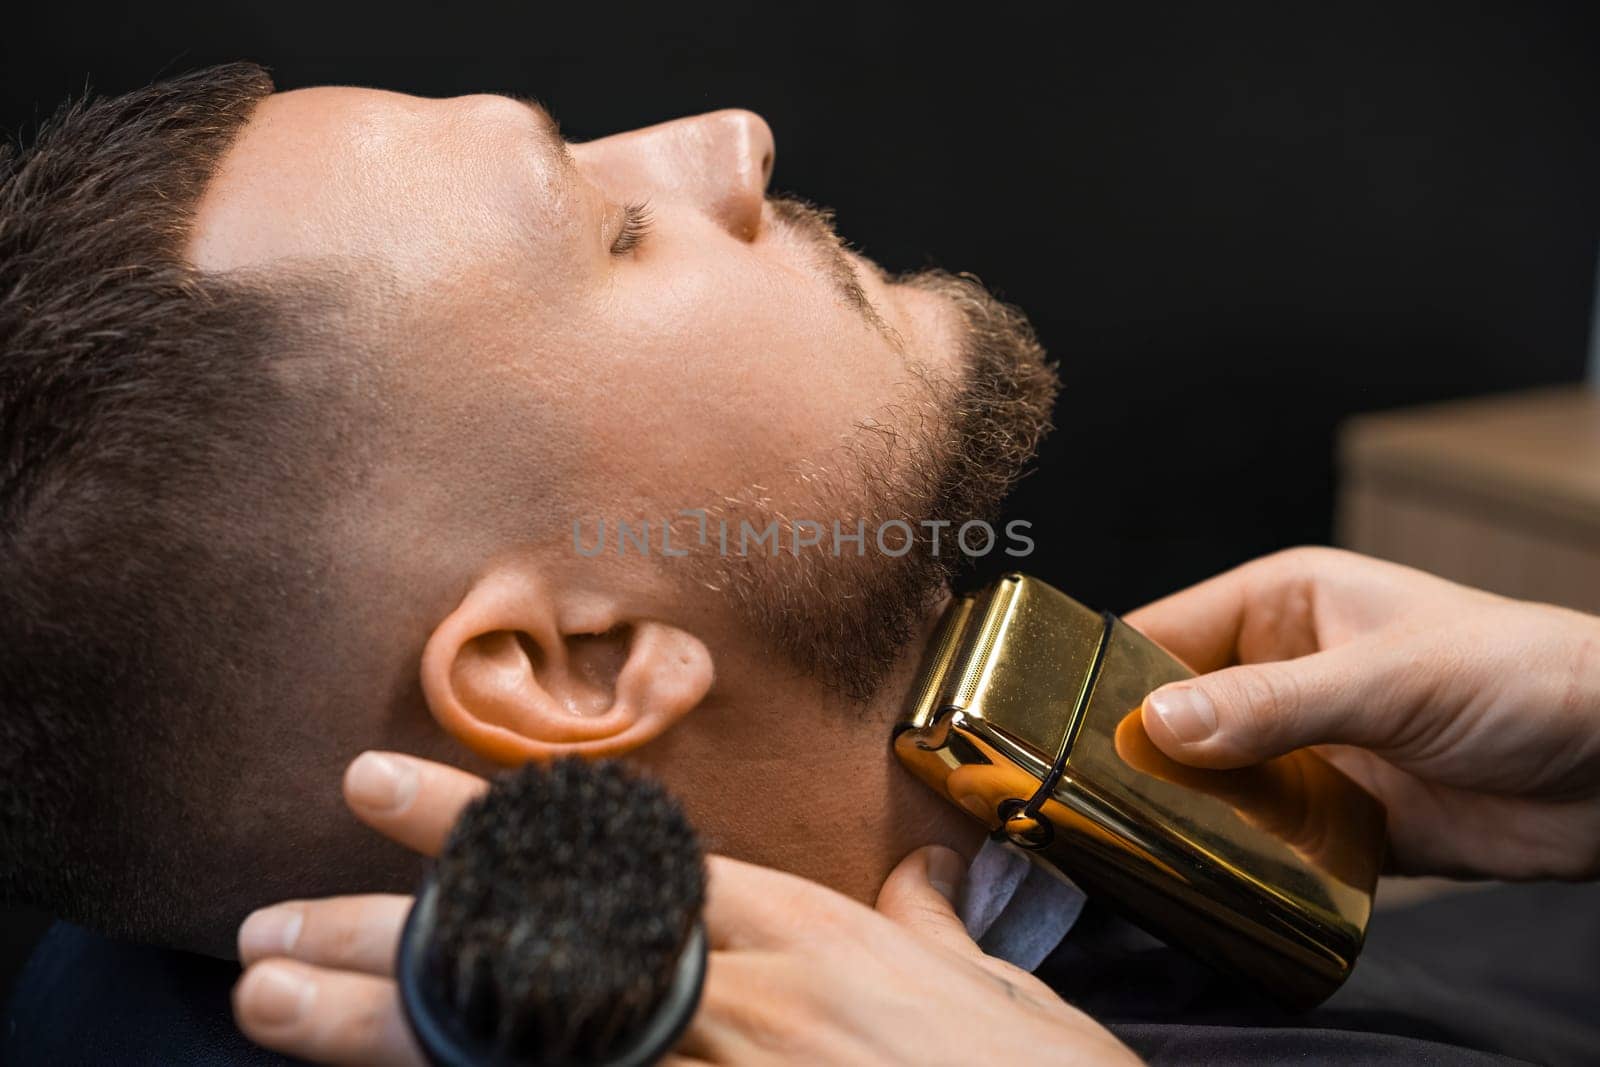 Client during beard trimming in the barbershop.